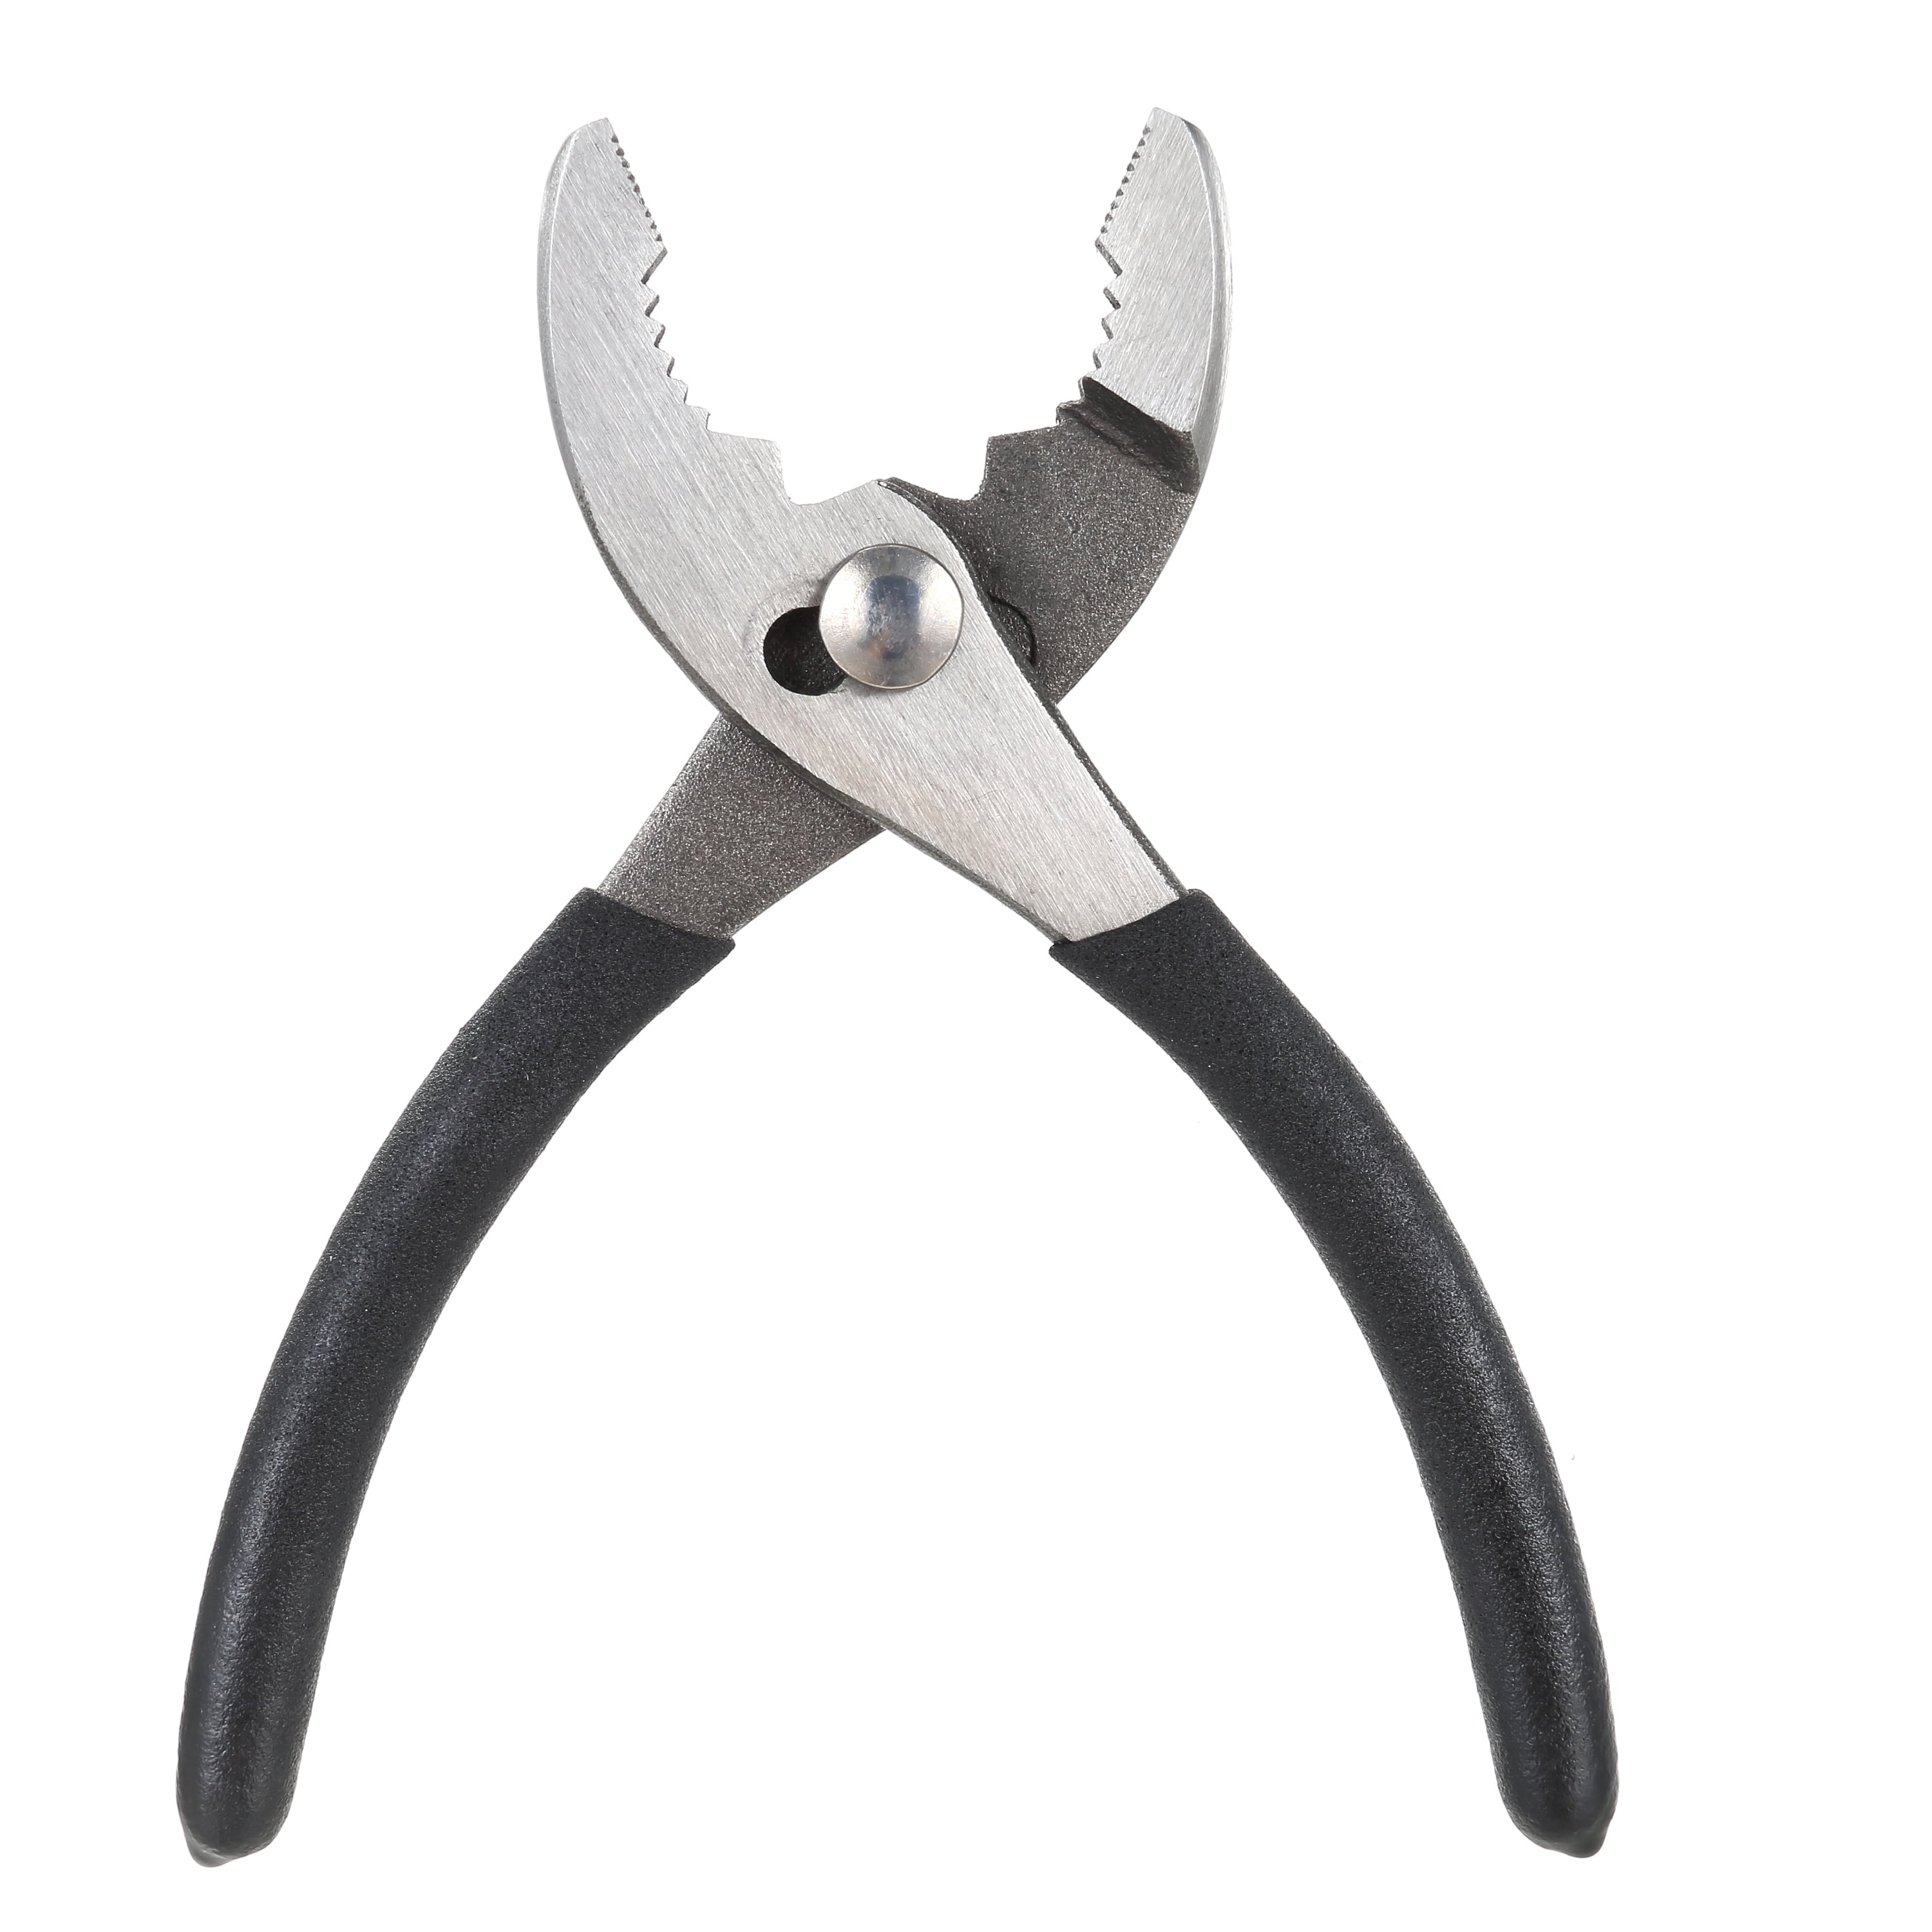 Newest tool purchased for the job. Slip joint soft jaw pliers. Perfect for  stainless or plastic fittings that are being stubborn without breaking it  or marring. Saw a set at a customer